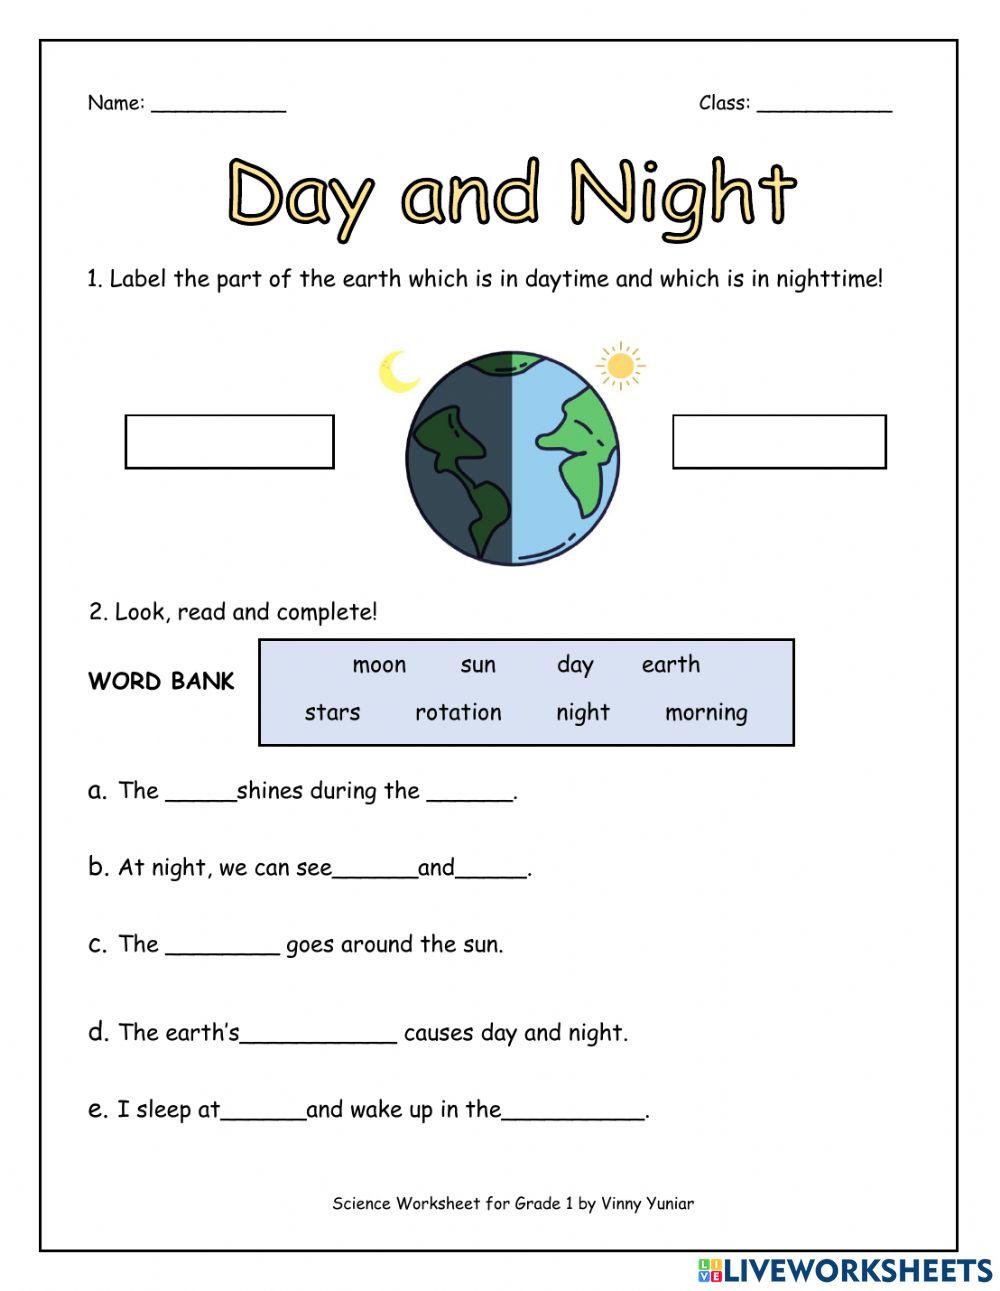 Day and Night Worksheet for Grade 1